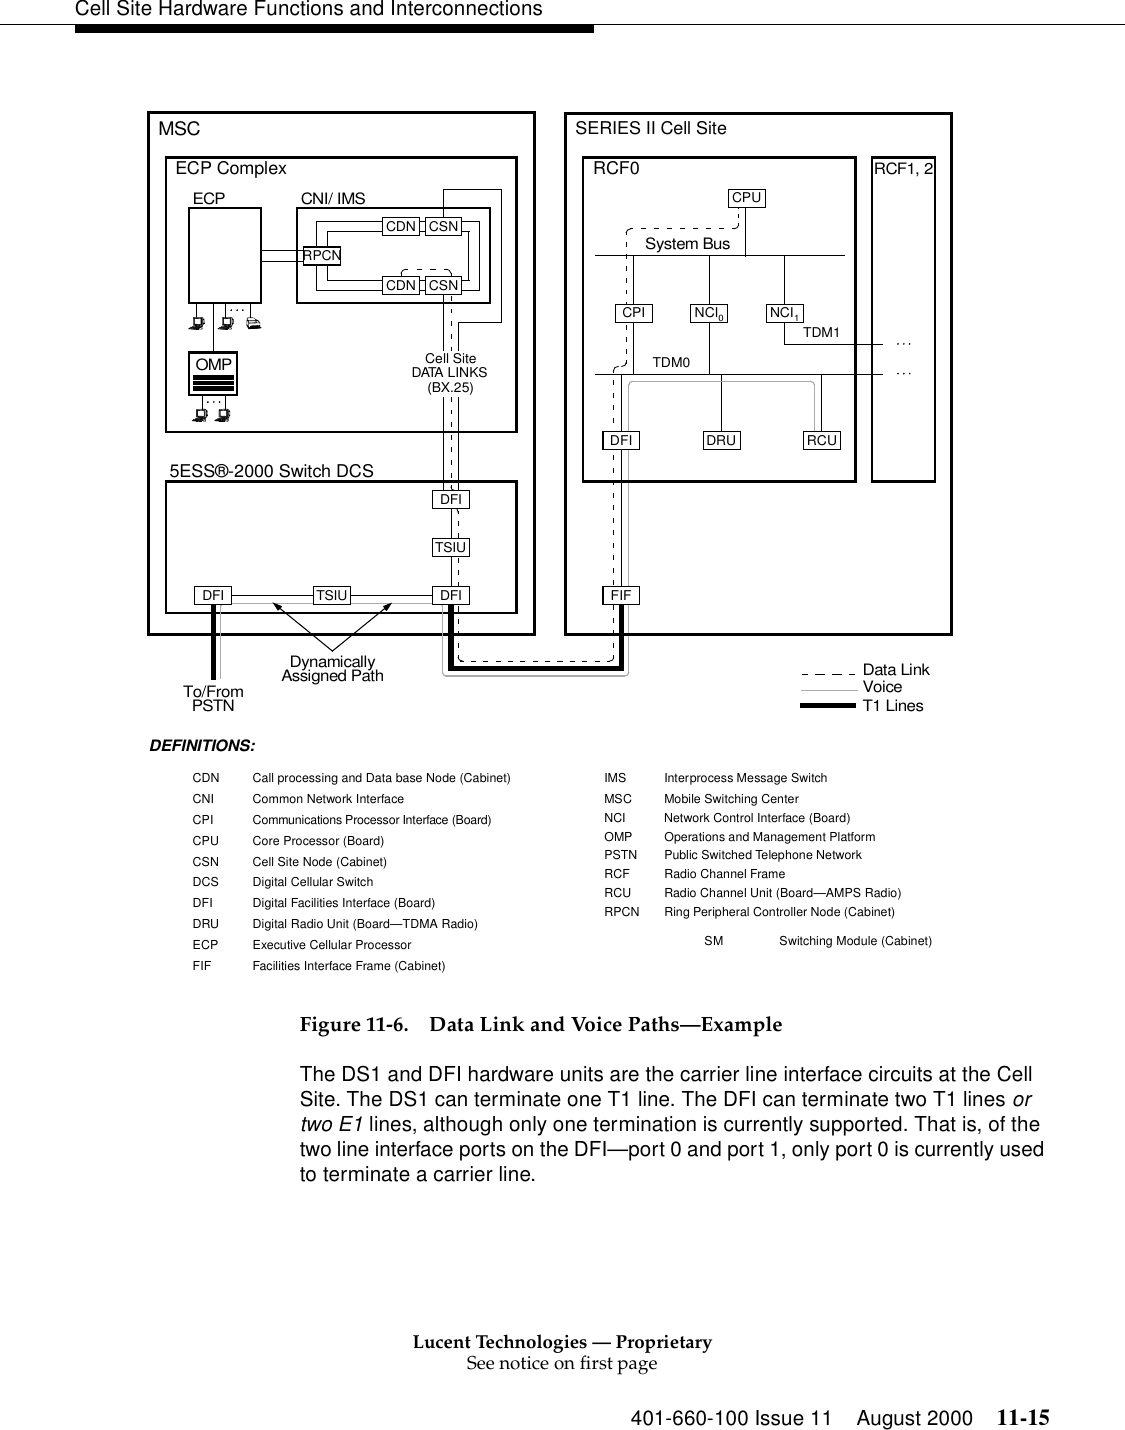 Lucent Technologies — ProprietarySee notice on first page401-660-100 Issue 11 August 2000 11-15Cell Site Hardware Functions and InterconnectionsFigure 11-6. Data Link and Voice Paths—ExampleThe DS1 and DFI hardware units are the carrier line interface circuits at the Cell Site. The DS1 can terminate one T1 line. The DFI can terminate two T1 lines or two E1 lines, although only one termination is currently supported. That is, of the two line interface ports on the DFI—port 0 and port 1, only port 0 is currently used to terminate a carrier line.SERIES II Cell SiteVoiceData LinkT1 LinesSystem BusCPITDM1RCF0RCF1, 2TDM0RCURPCN5ESS®-2000 Switch DCSECP CNI/ IMSOMPCDN CSNTo/FromPSTNECP ComplexDRUNCI0NCI1CPUDFICSNDFIDFICell SiteDATA LINKS(BX.25)MSCFIFDynamicallyAssigned PathDEFINITIONS:CDN Call processing and Data base Node (Cabinet)CNI Common Network InterfaceCPI Communications Processor Interface (Board)CPU Core Processor (Board)CSN Cell Site Node (Cabinet)DCS Digital Cellular SwitchDFI Digital Facilities Interface (Board)DRU Digital Radio Unit (Board—TDMA Radio)ECP Executive Cellular ProcessorFIF Facilities Interface Frame (Cabinet)IMS Interprocess Message SwitchMSC Mobile Switching CenterNCI Network Control Interface (Board)OMP Operations and Management PlatformPSTN Public Switched Telephone NetworkRCF Radio Channel FrameRCU Radio Channel Unit (Board—AMPS Radio)RPCN Ring Peripheral Controller Node (Cabinet)SM Switching Module (Cabinet)CDNDFITSIUTSIU